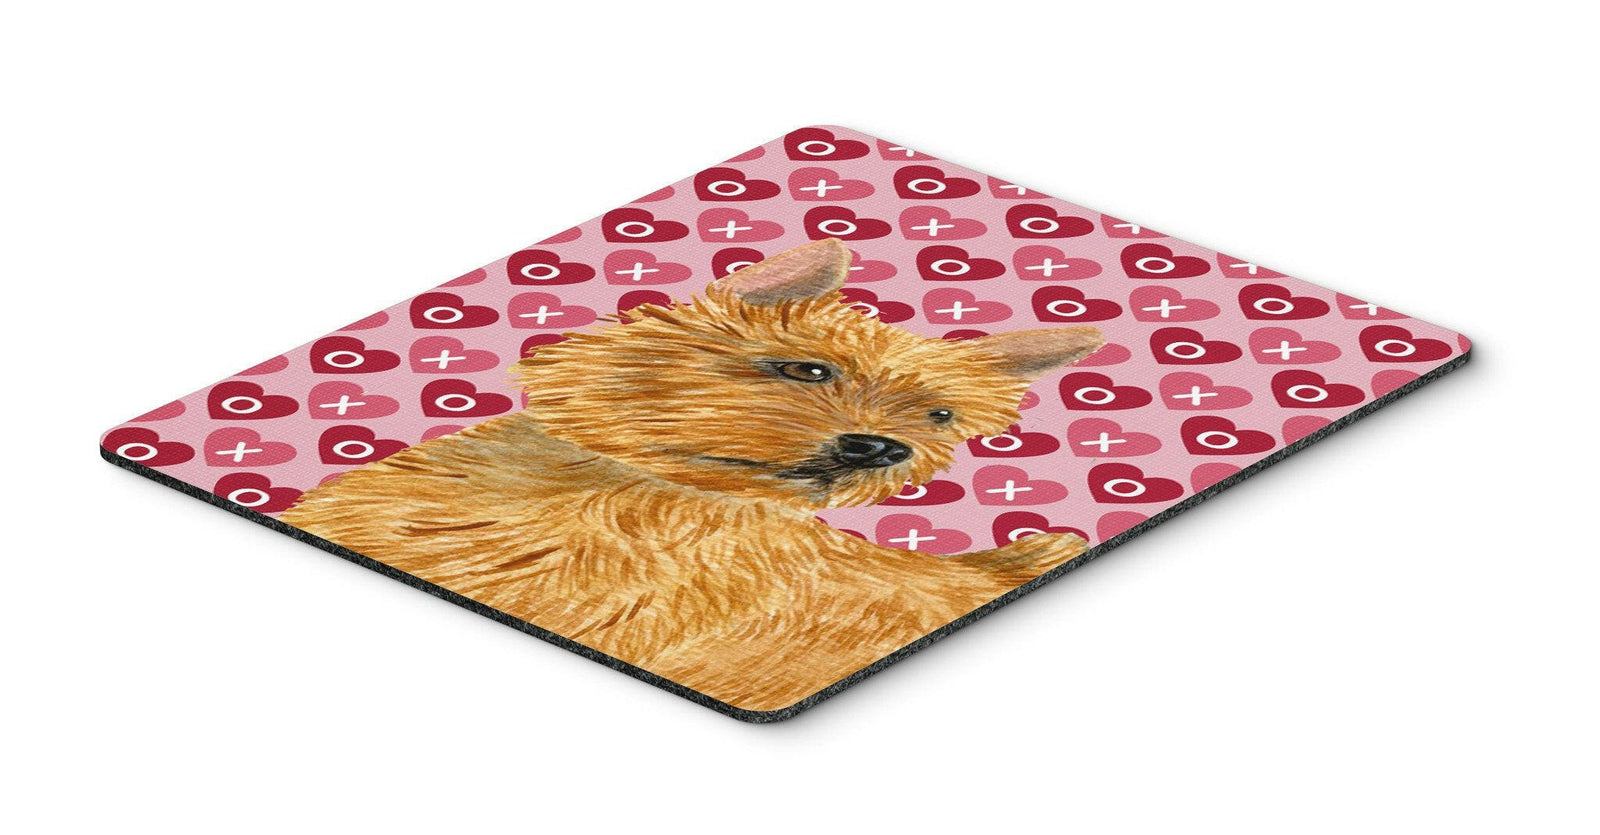 Norwich Terrier Hearts Love and Valentine's Day Mouse Pad, Hot Pad or Trivet by Caroline's Treasures